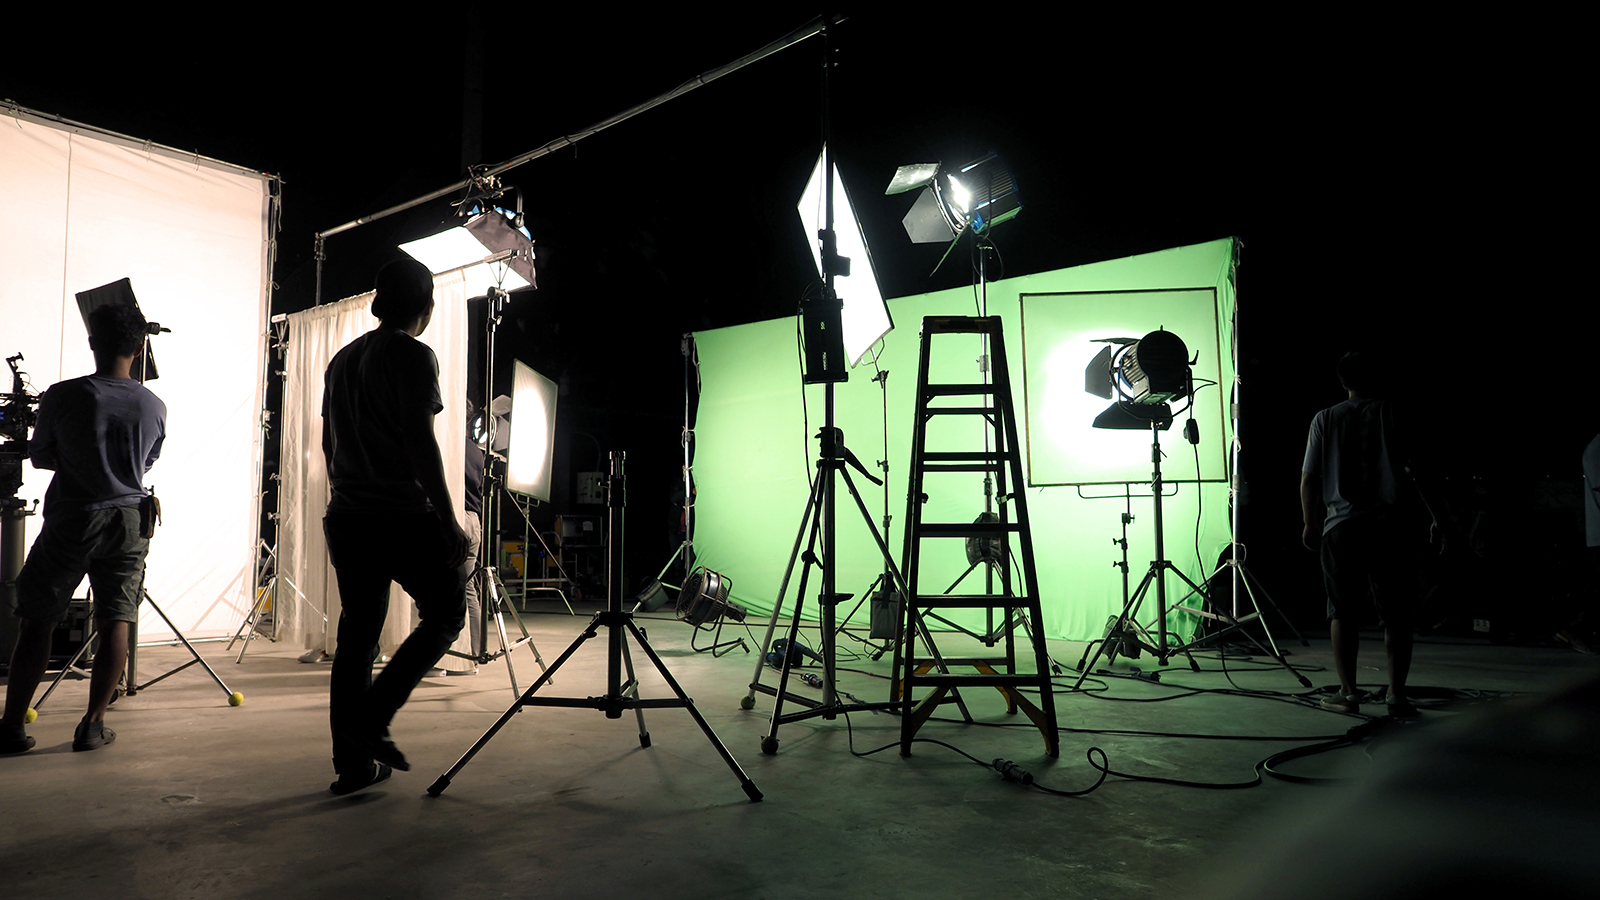 Photo of a film set with cameras and a green screen